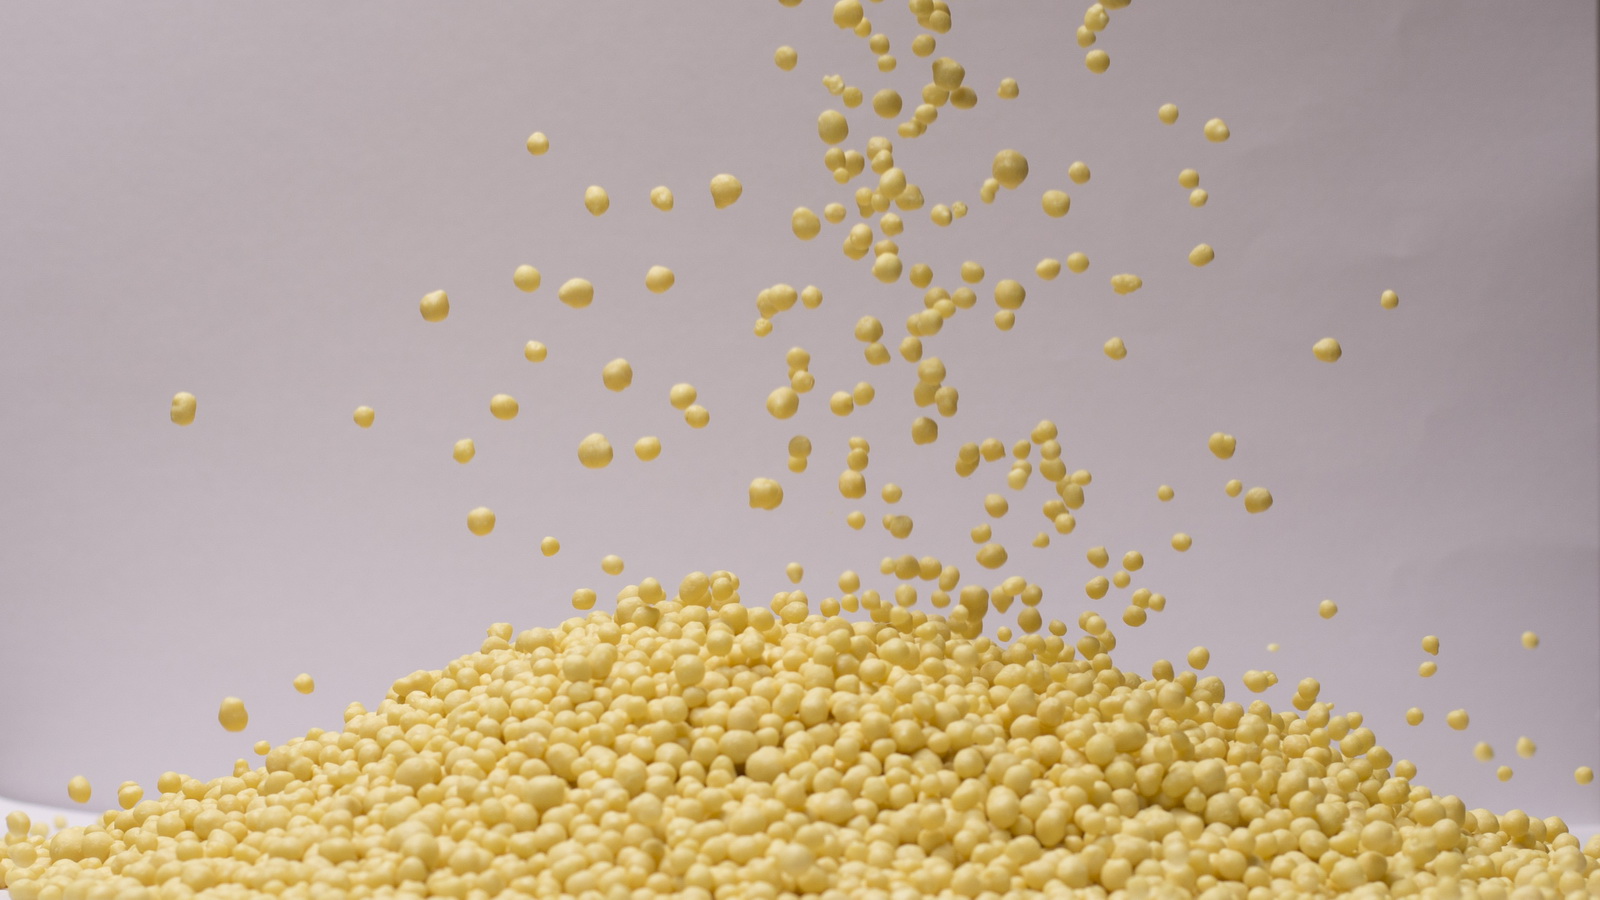 Sulphur Solidification and Forming - Granulation